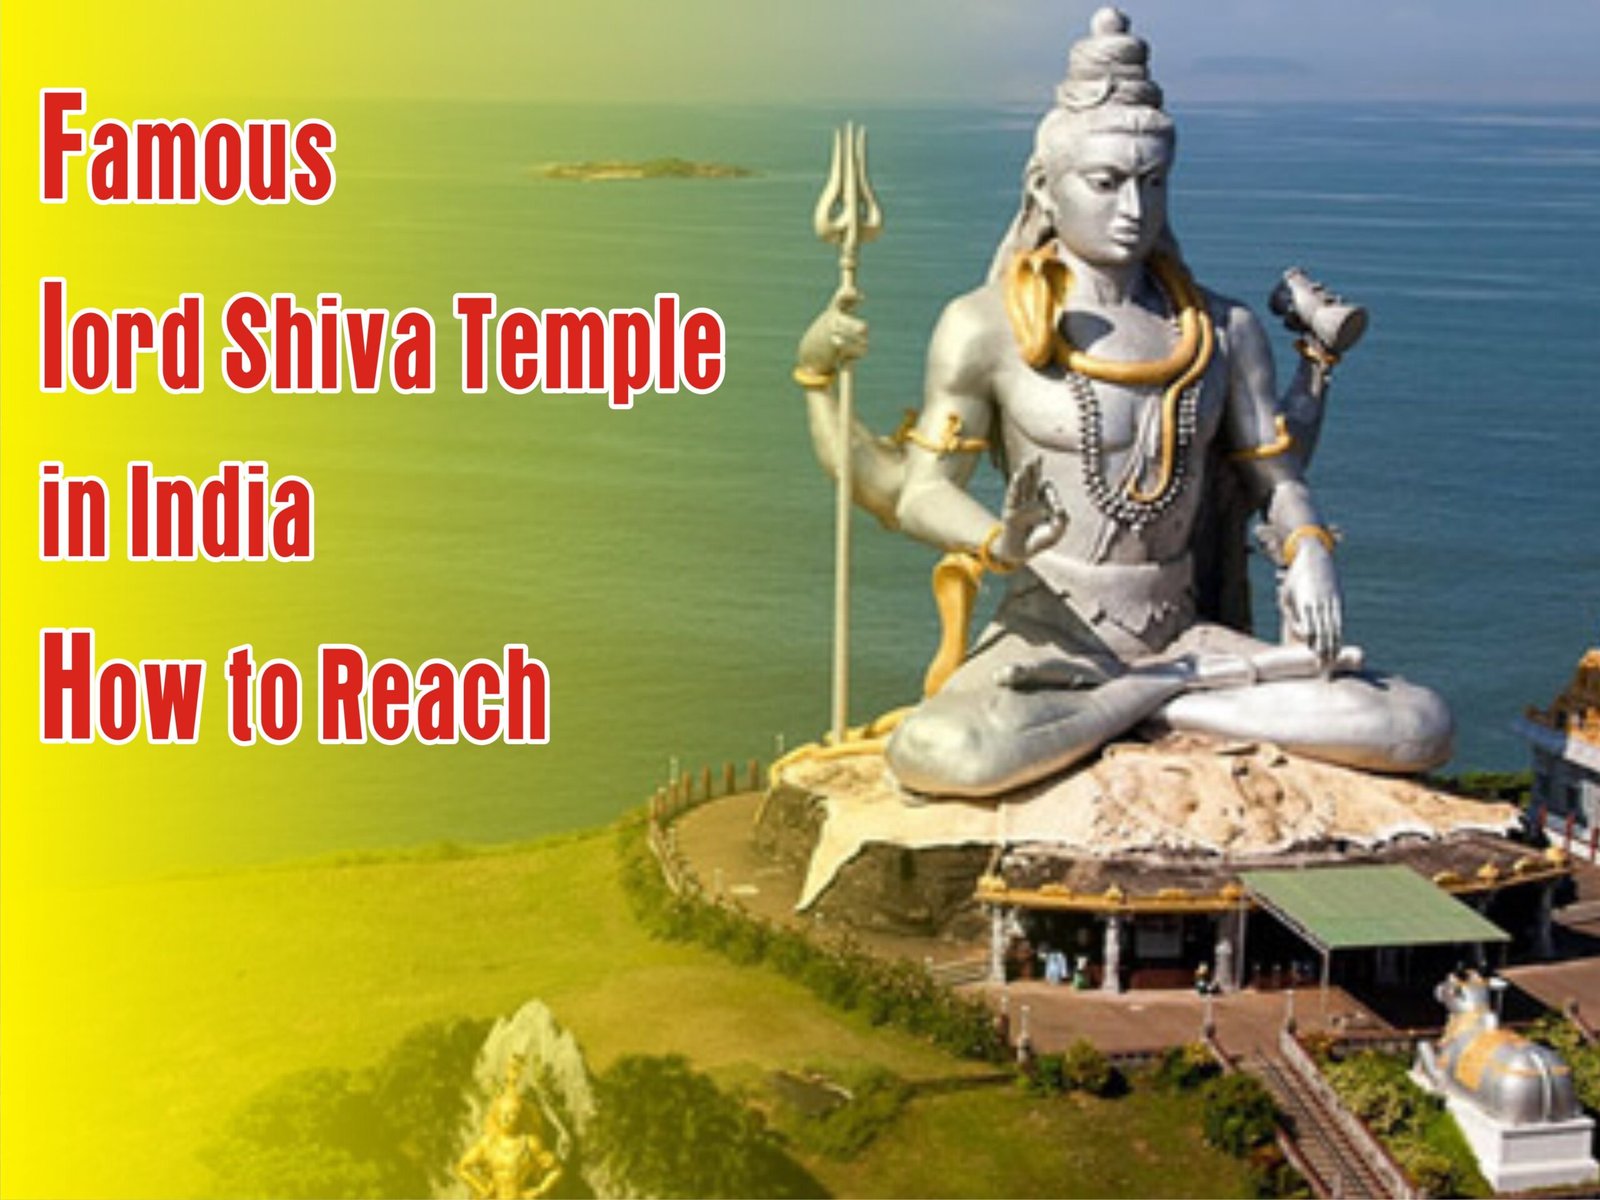 Ten Most Famous Shiva Temples of India